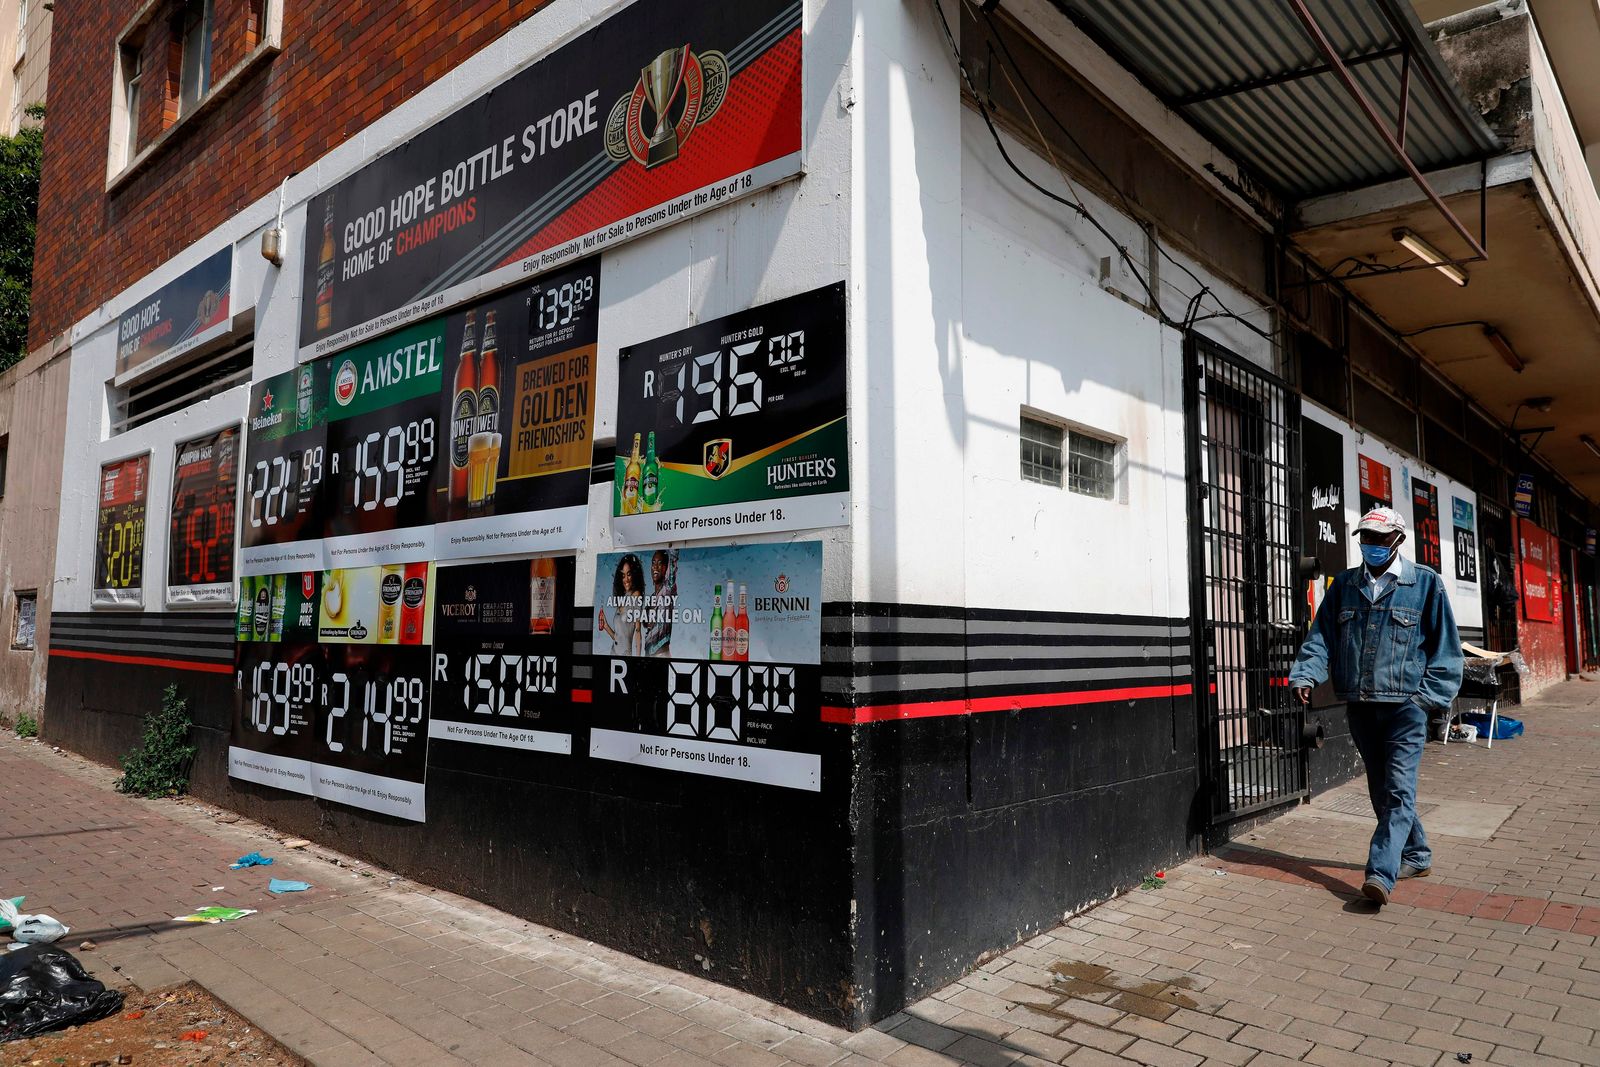 A man walks past a closed liquor store in Hillbrow, Johannesburg, on December 29, 2020. - South African President Cyril Ramaphosa on December 28, 2020 announced a new ban on alcohol sales and said mask-wearing will be mandatory in public after South Africa became the continent's first to record one million coronavirus cases. (Photo by Phill Magakoe / AFP) - AFP